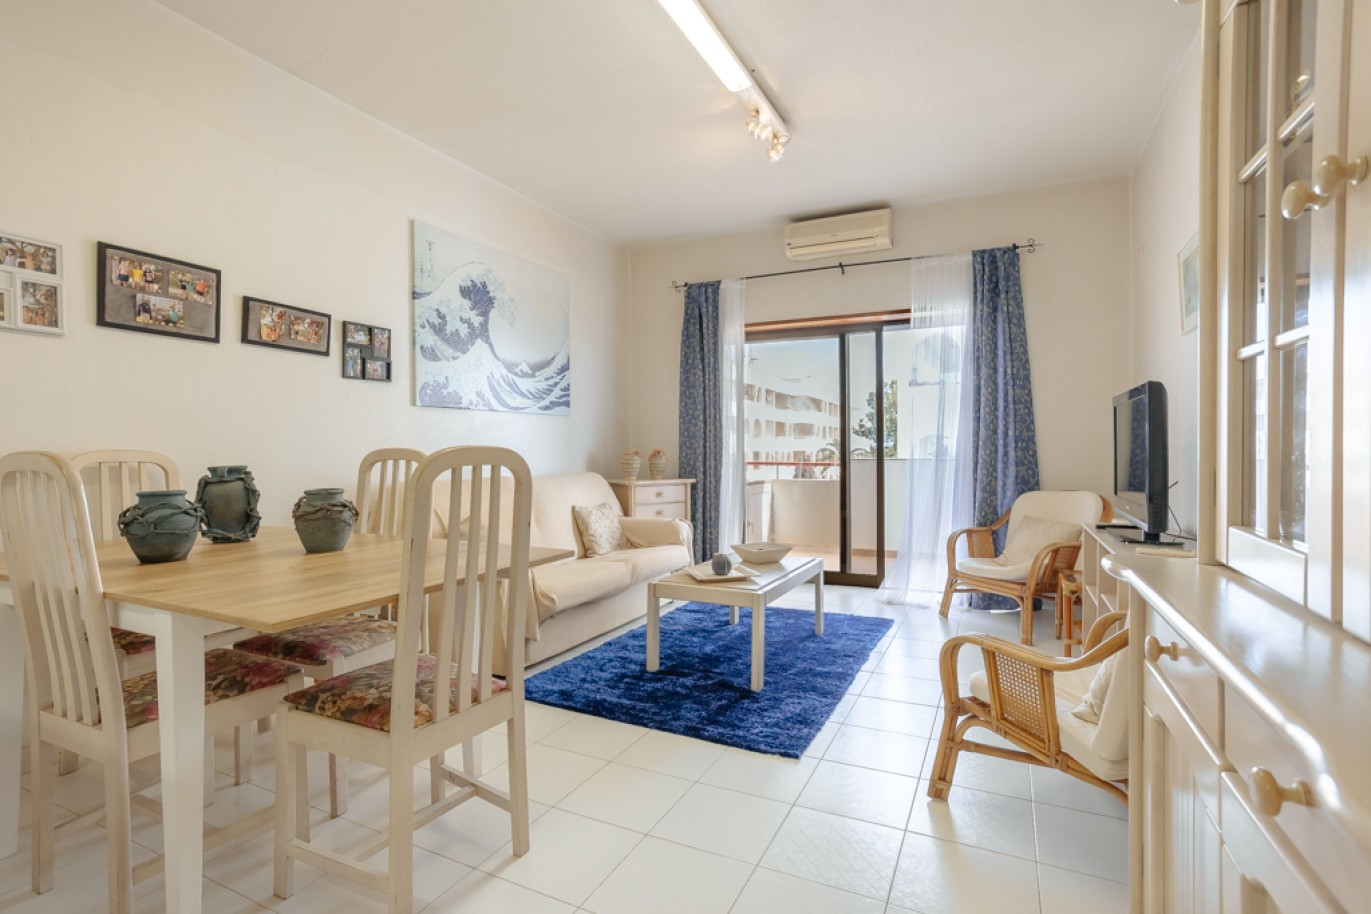 1+1-bedroom Apartment with sea views, for sale in Porches, Algarve_257045